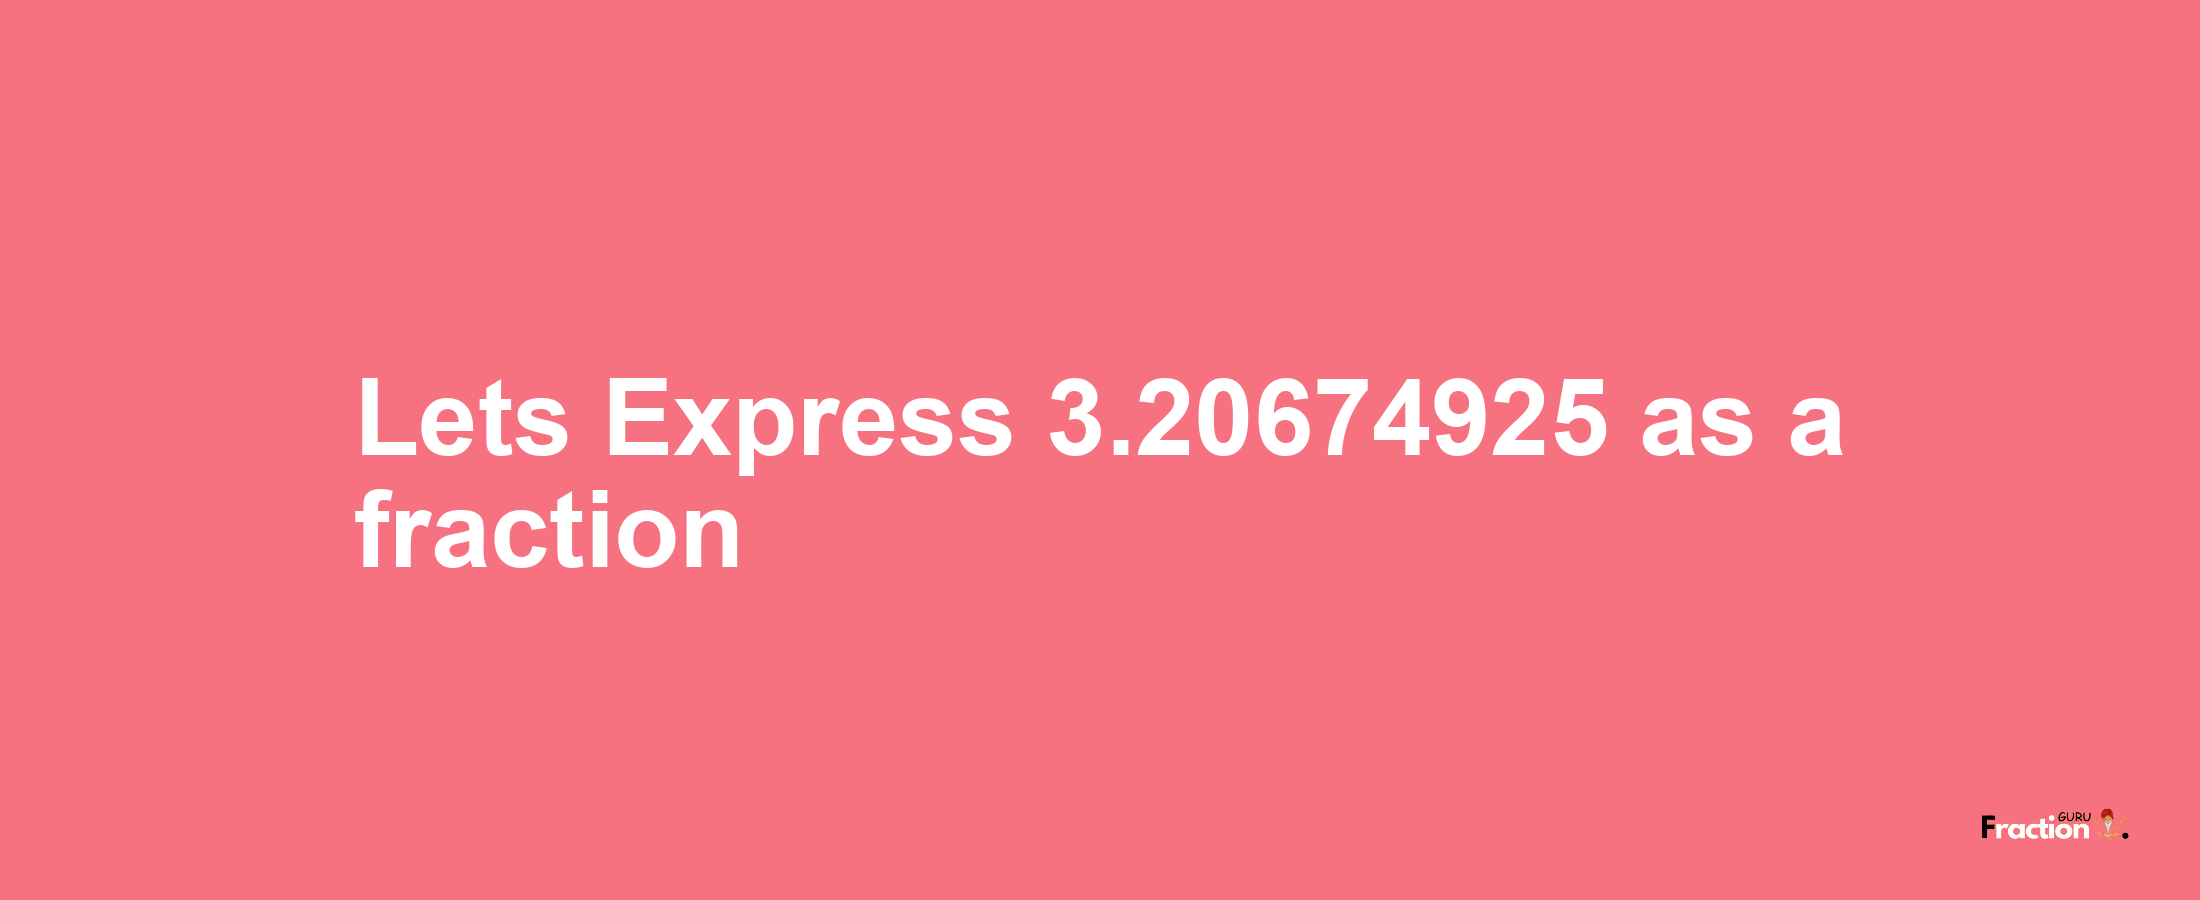 Lets Express 3.20674925 as afraction